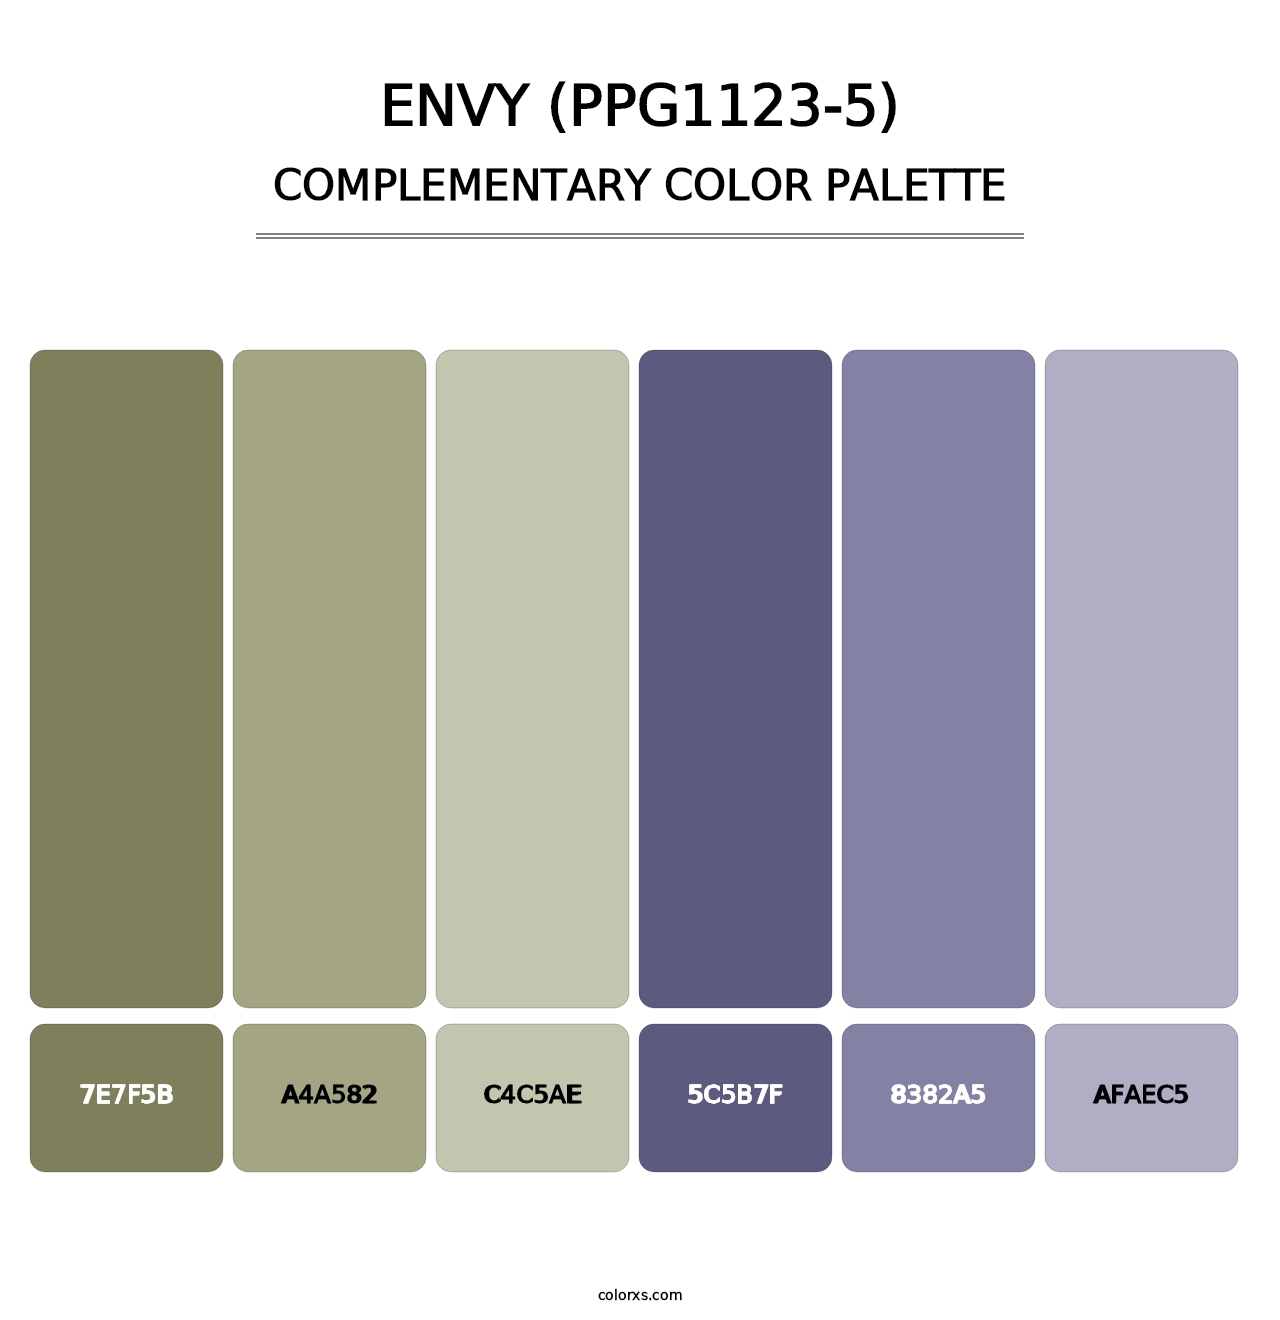 Envy (PPG1123-5) - Complementary Color Palette